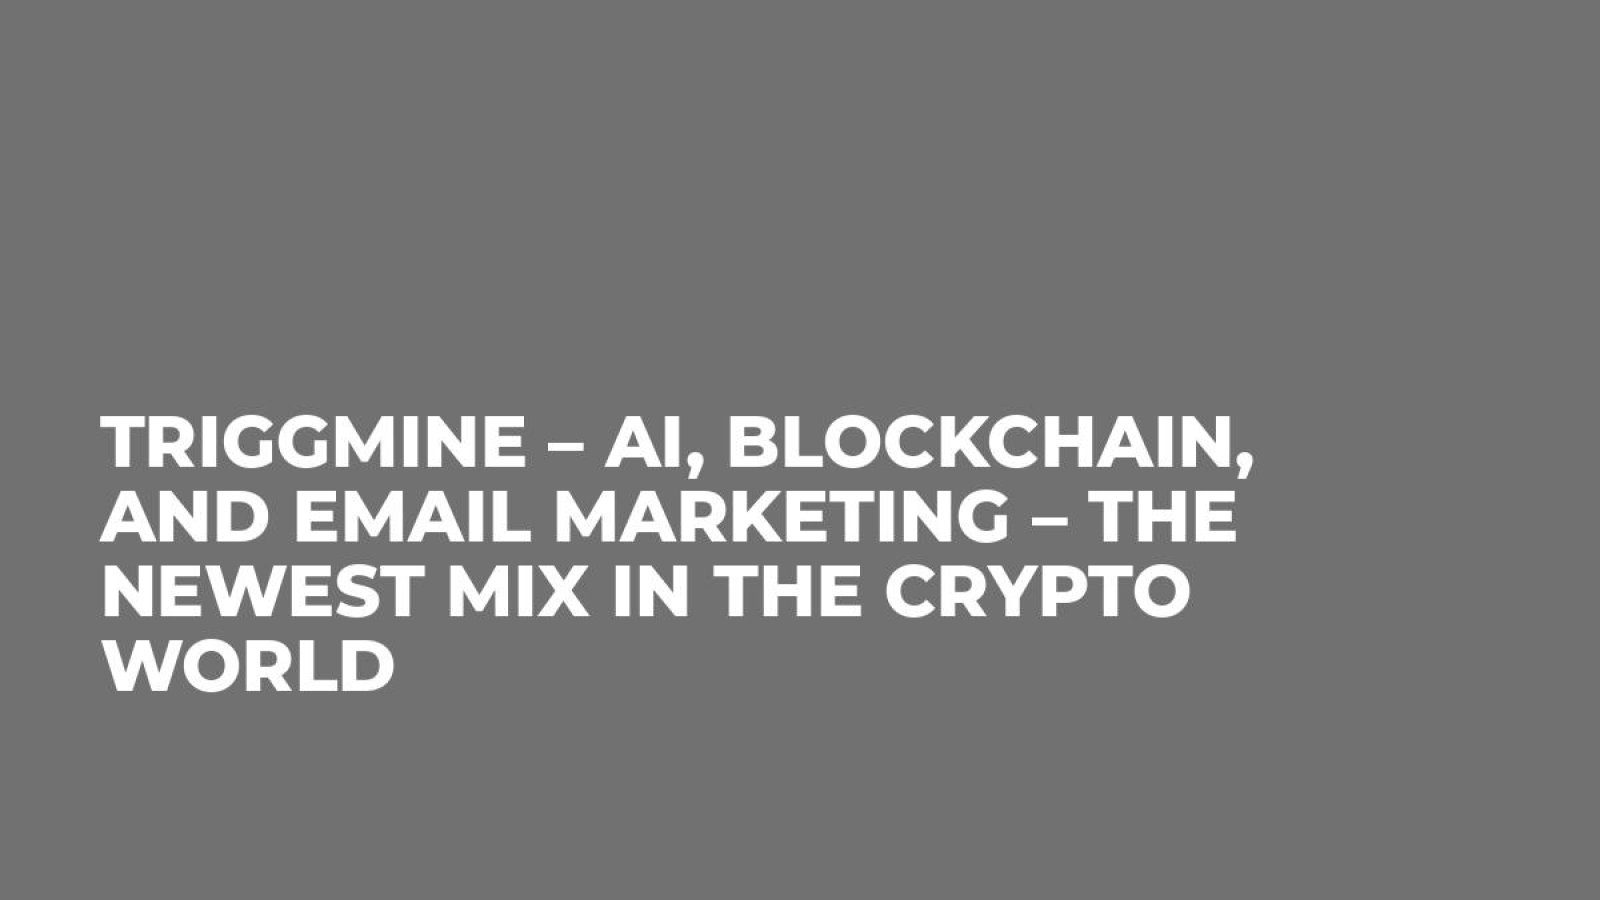 Triggmine – AI, Blockchain, and Email Marketing – the Newest Mix in the Crypto World